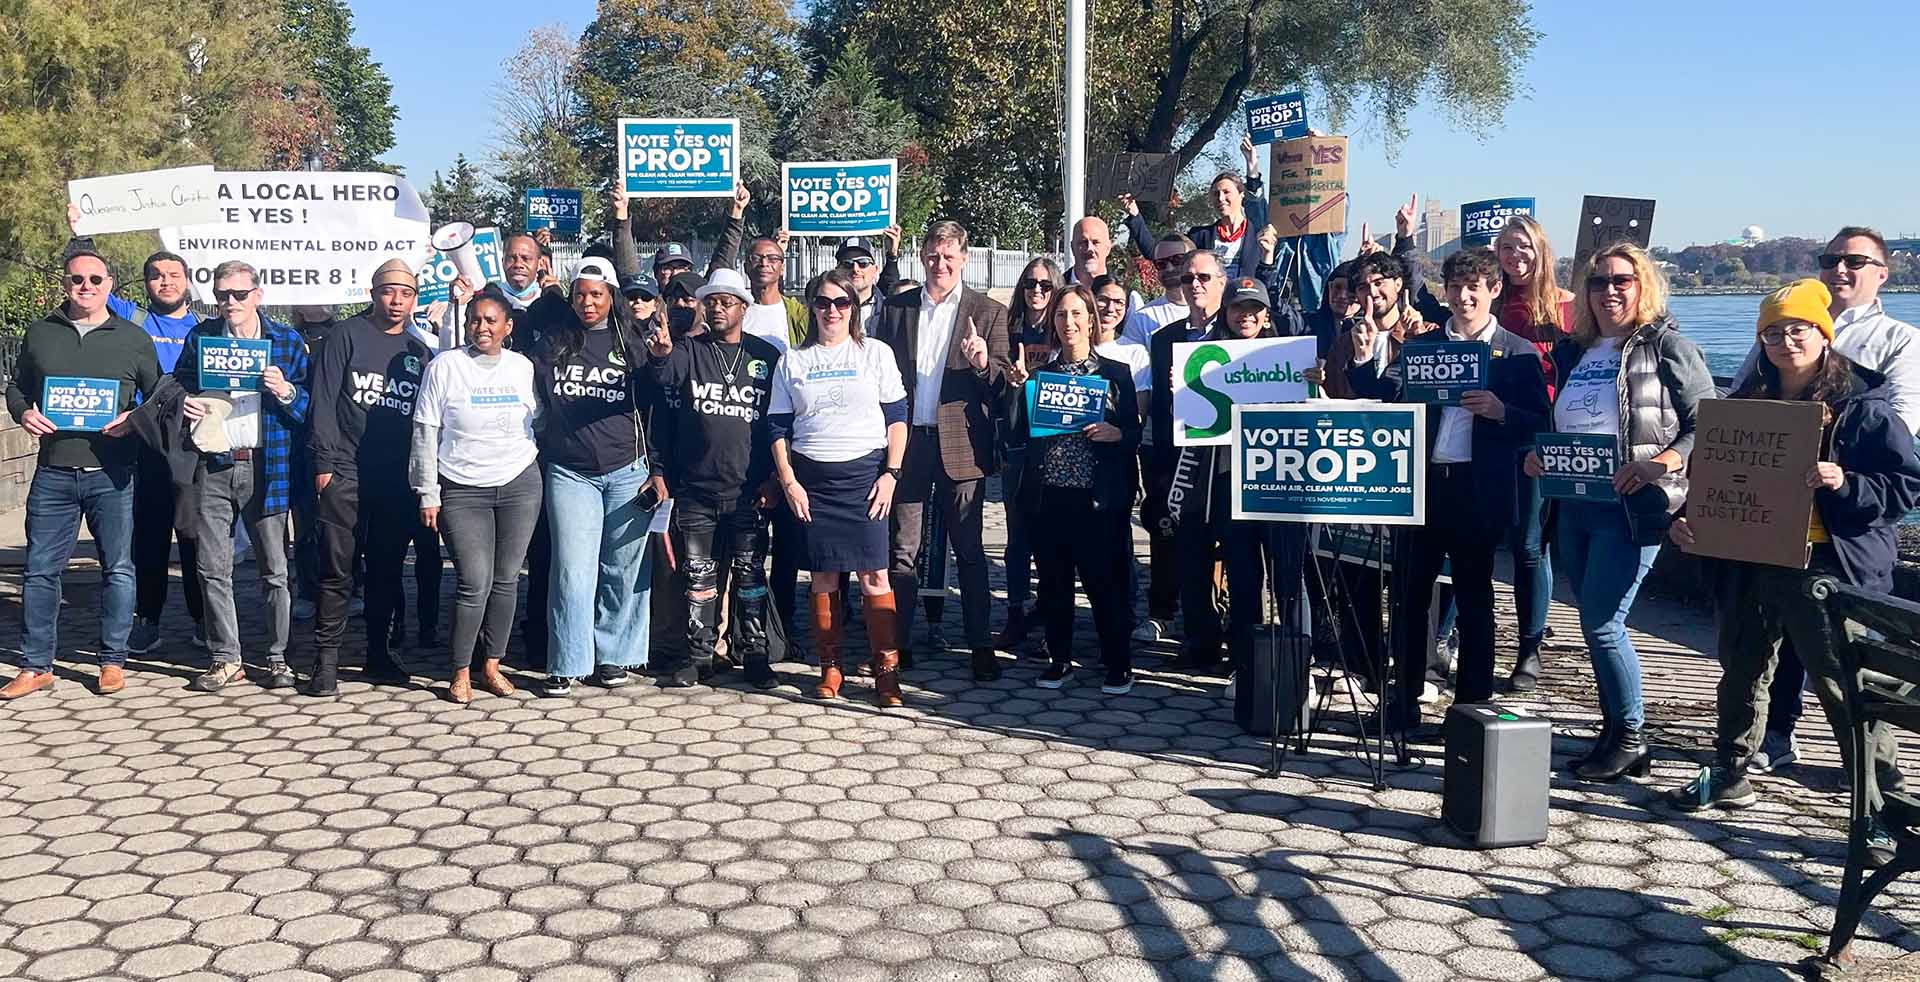 New York League of Conservation Voters rally in support of Prop 1, or the Green Bond Act, at Bushwick Inlet Park in Brooklyn.